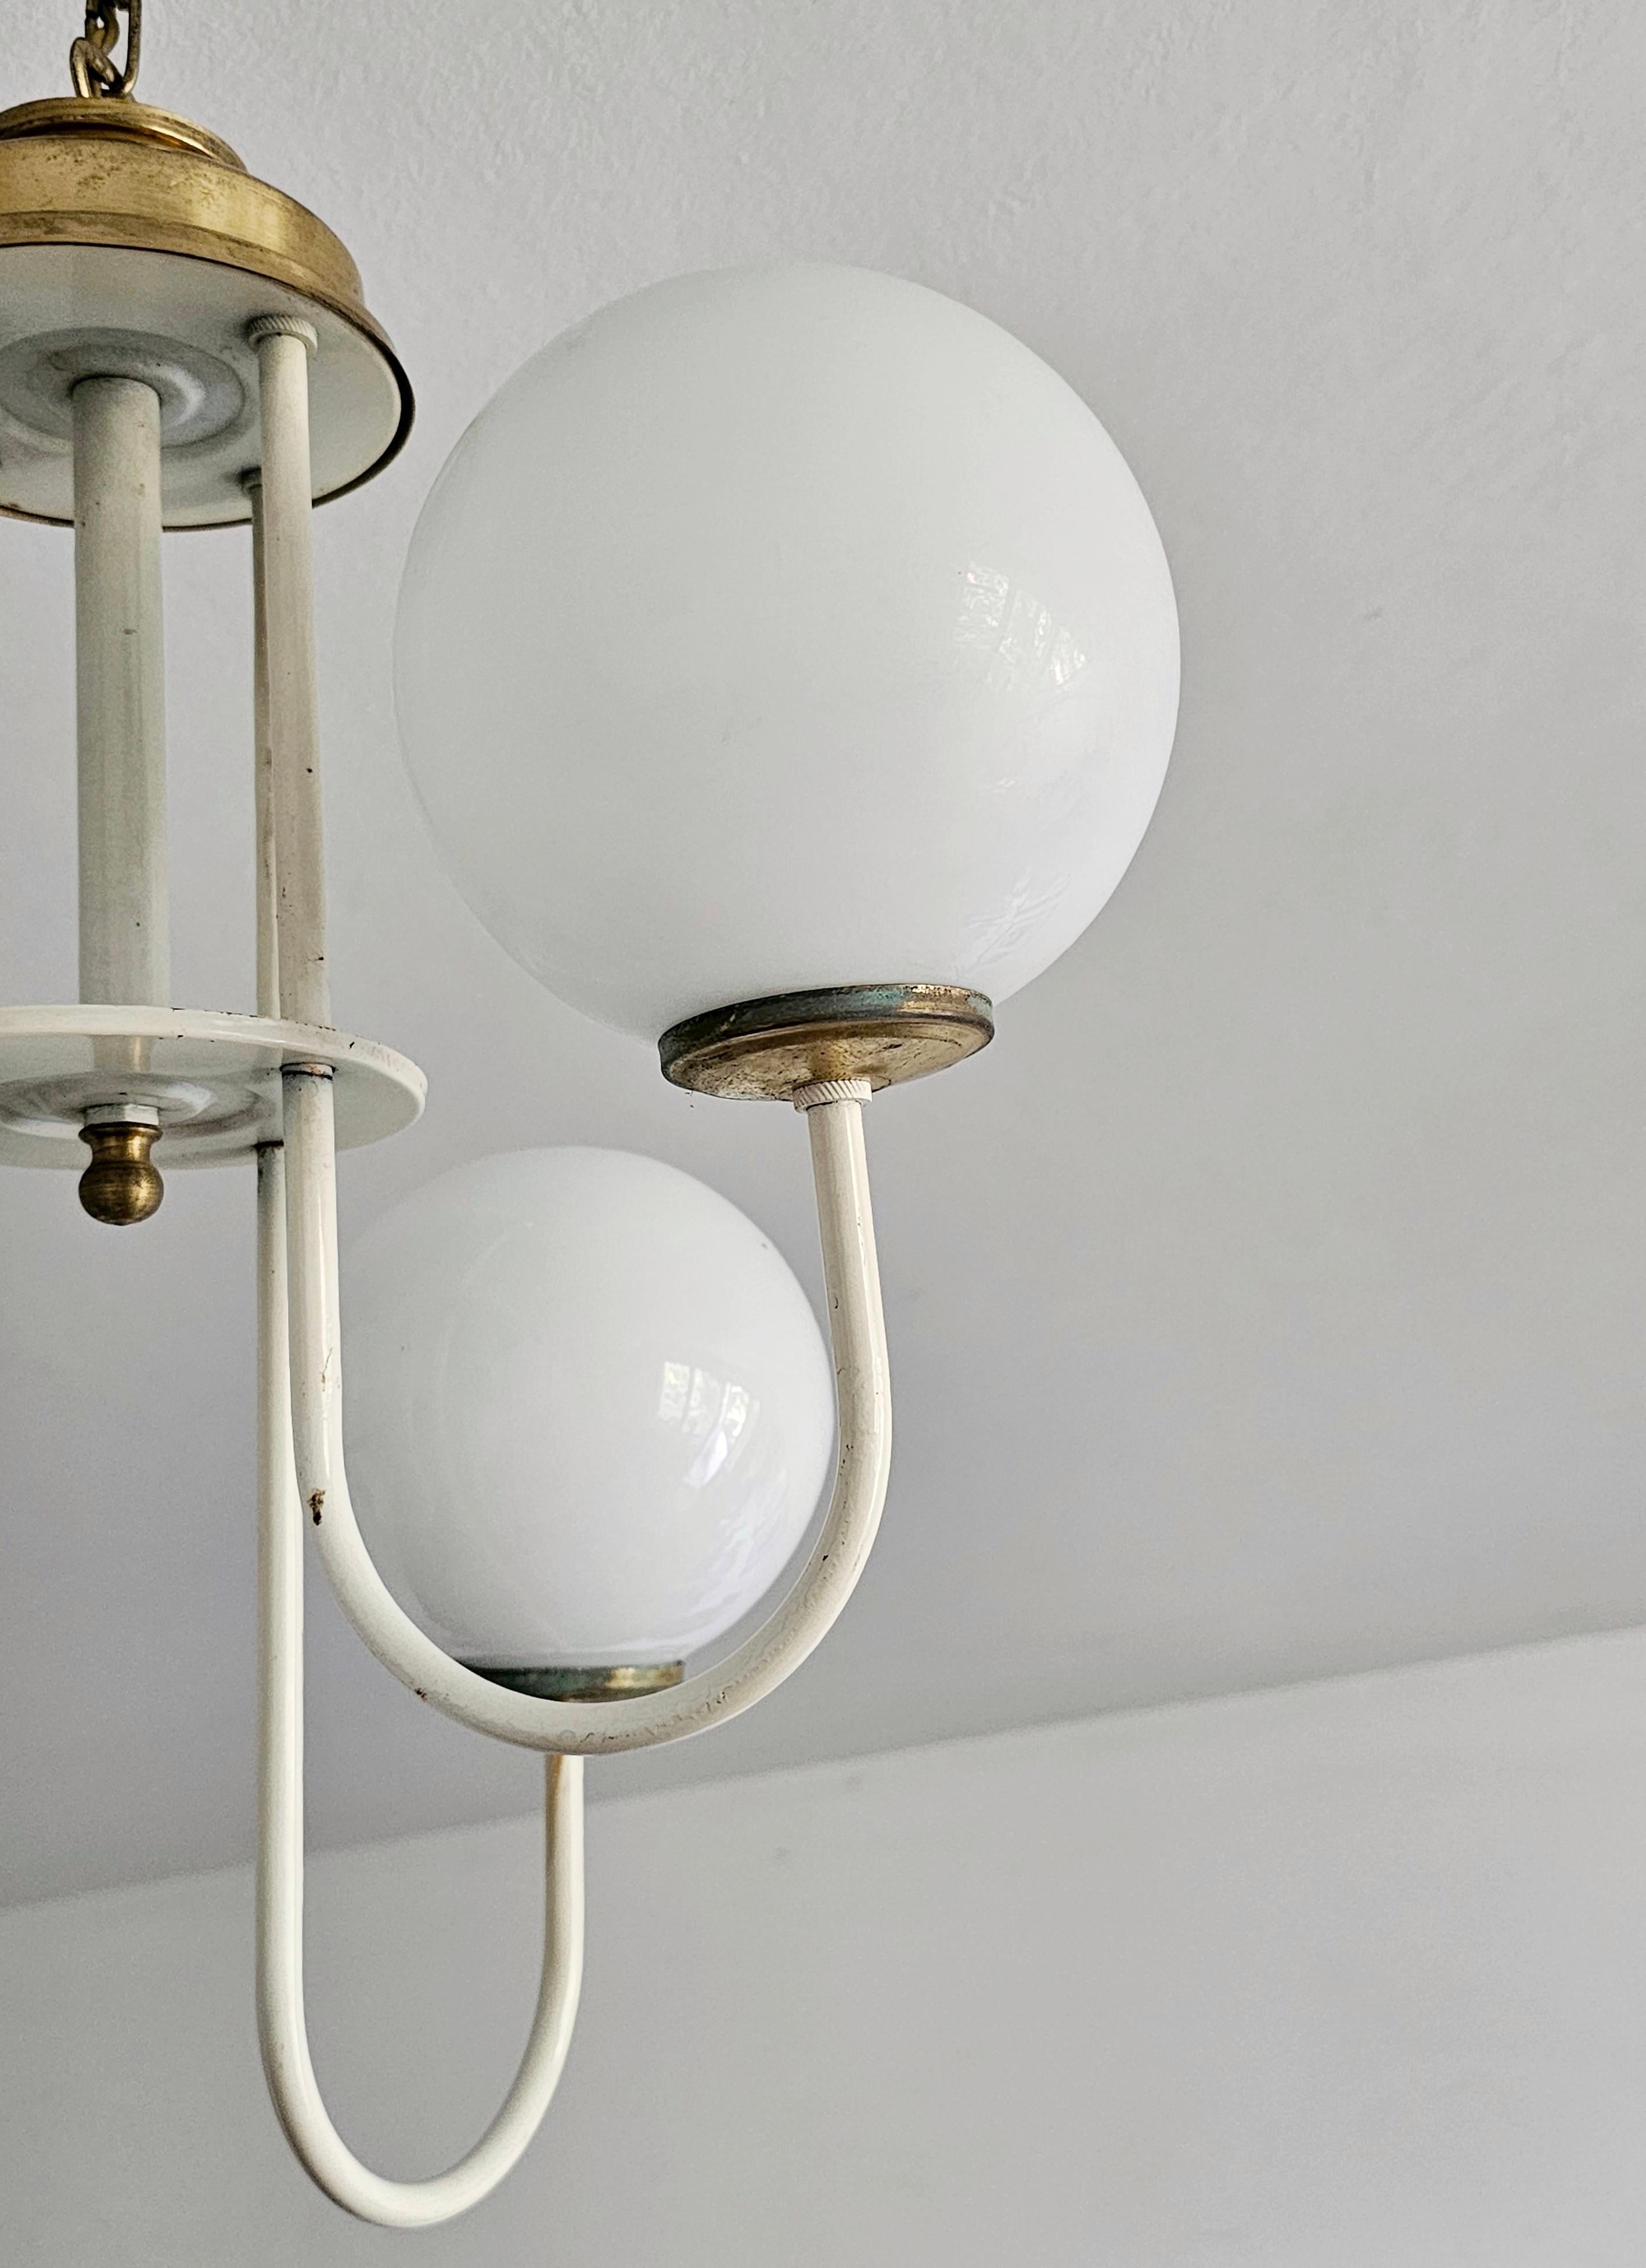 Rare Mid Century Modern Chandelier with Opaline Glass Balls, Italy 1960s For Sale 2